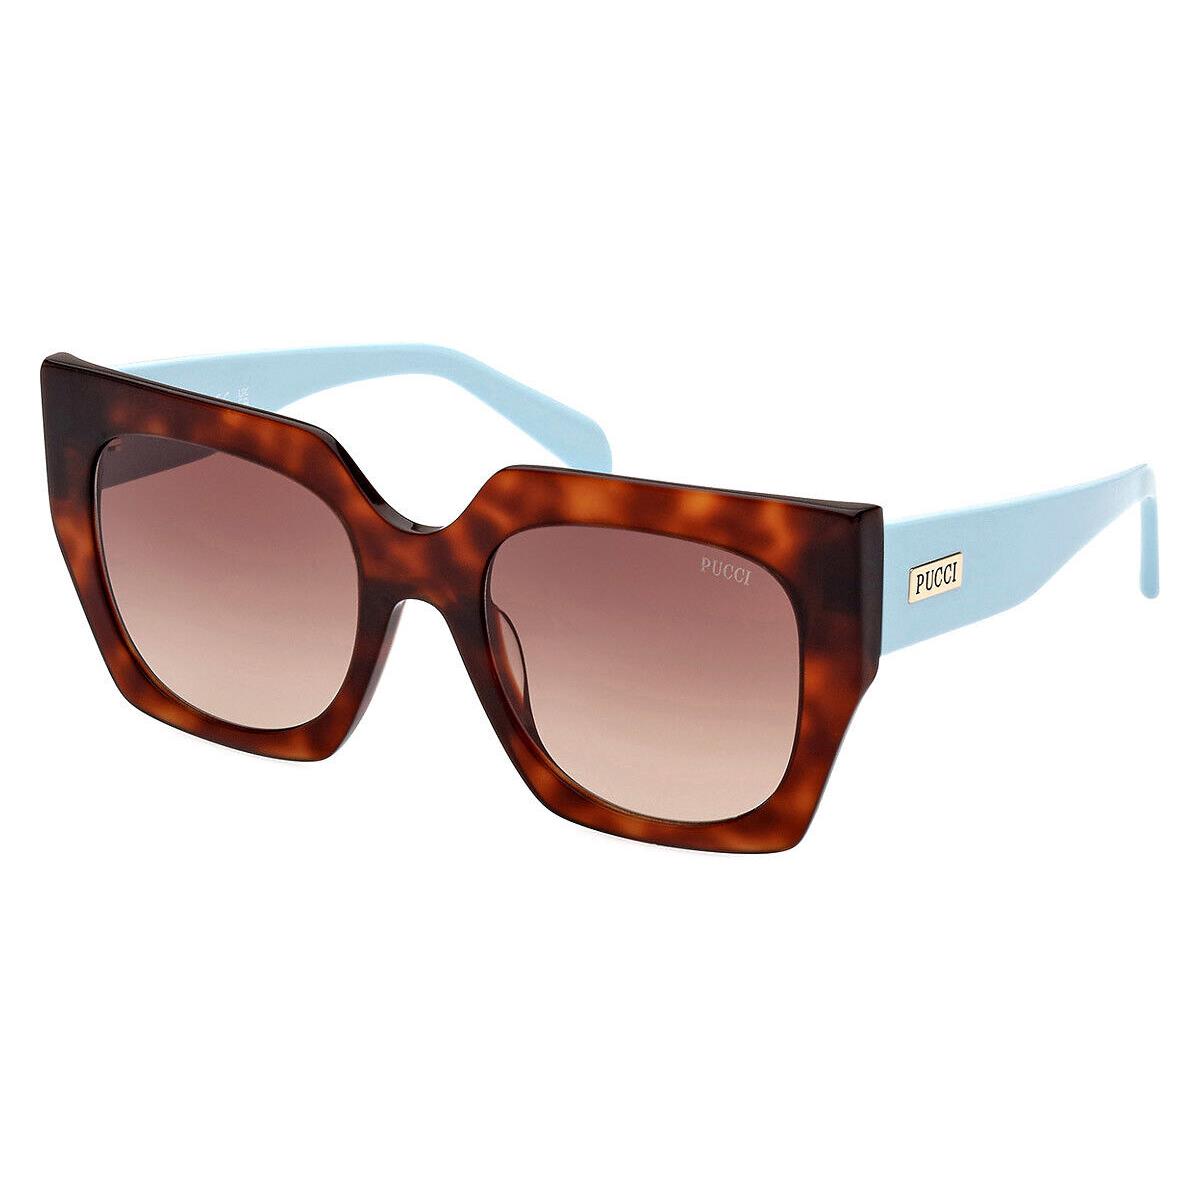 Emilio Pucci EP0197 Sunglasses Women Butterfly 52mm